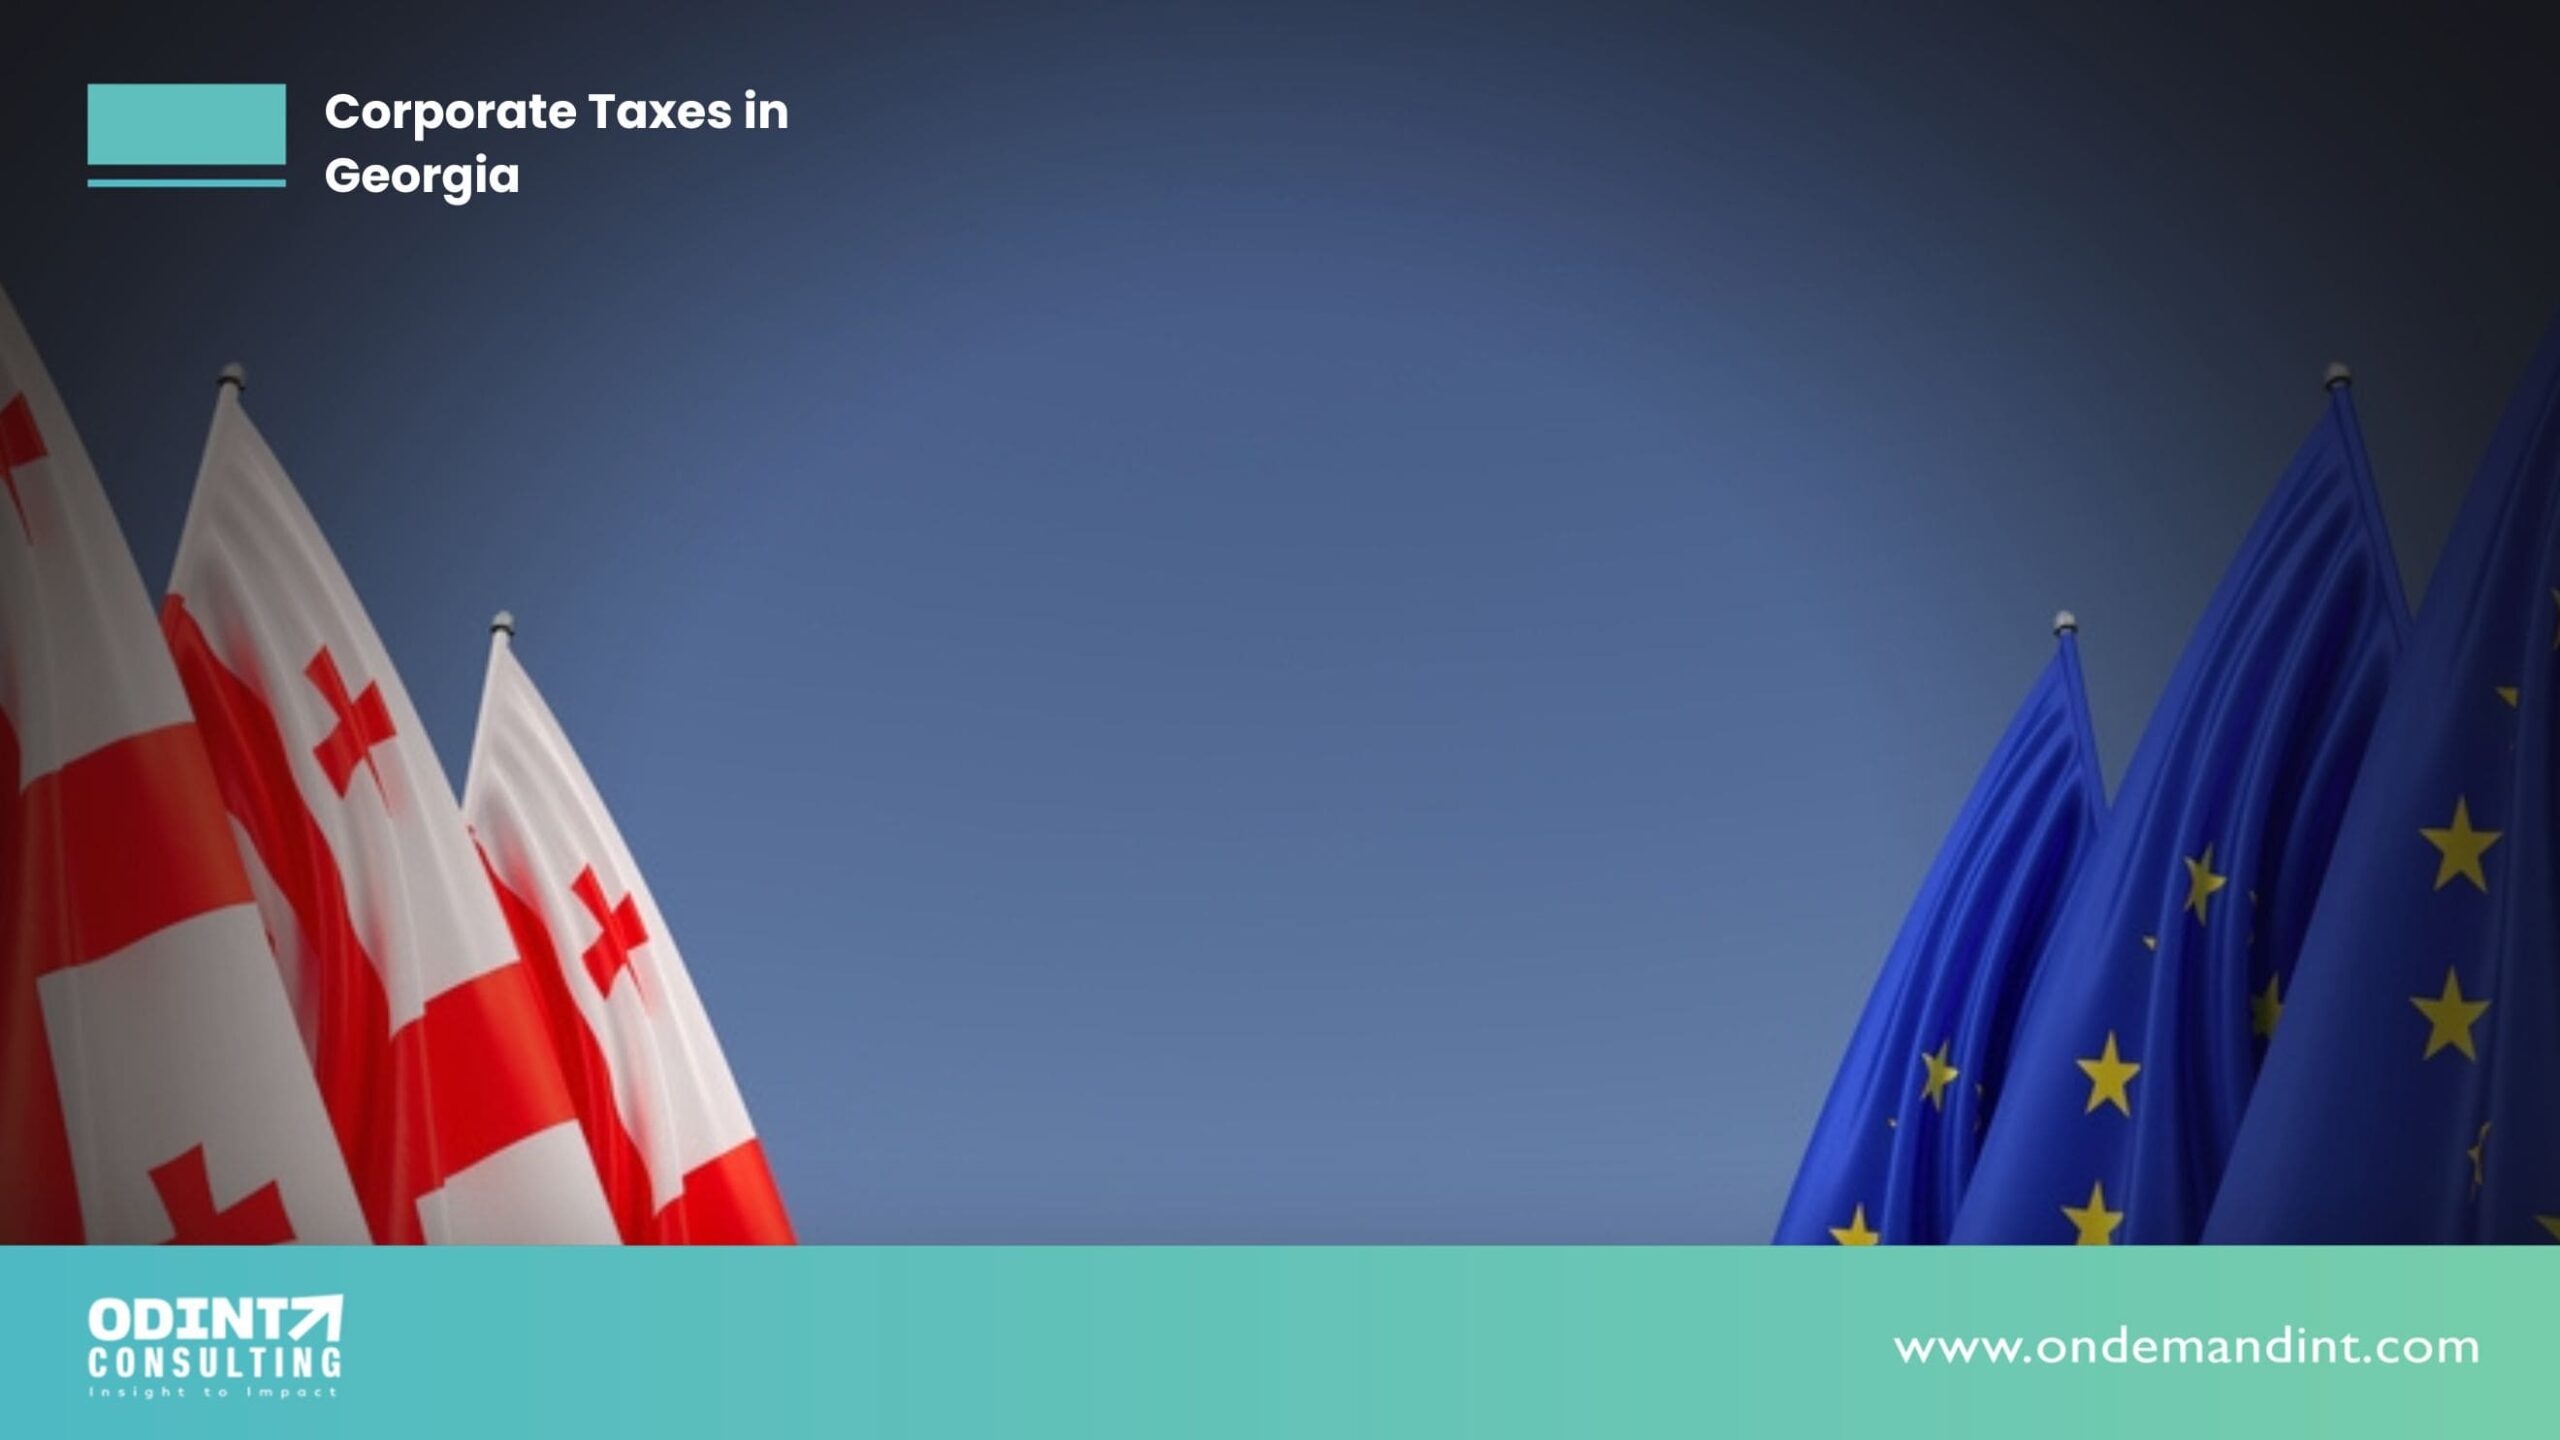 Corporate Taxes in Georgia: Various Taxes & Benefits